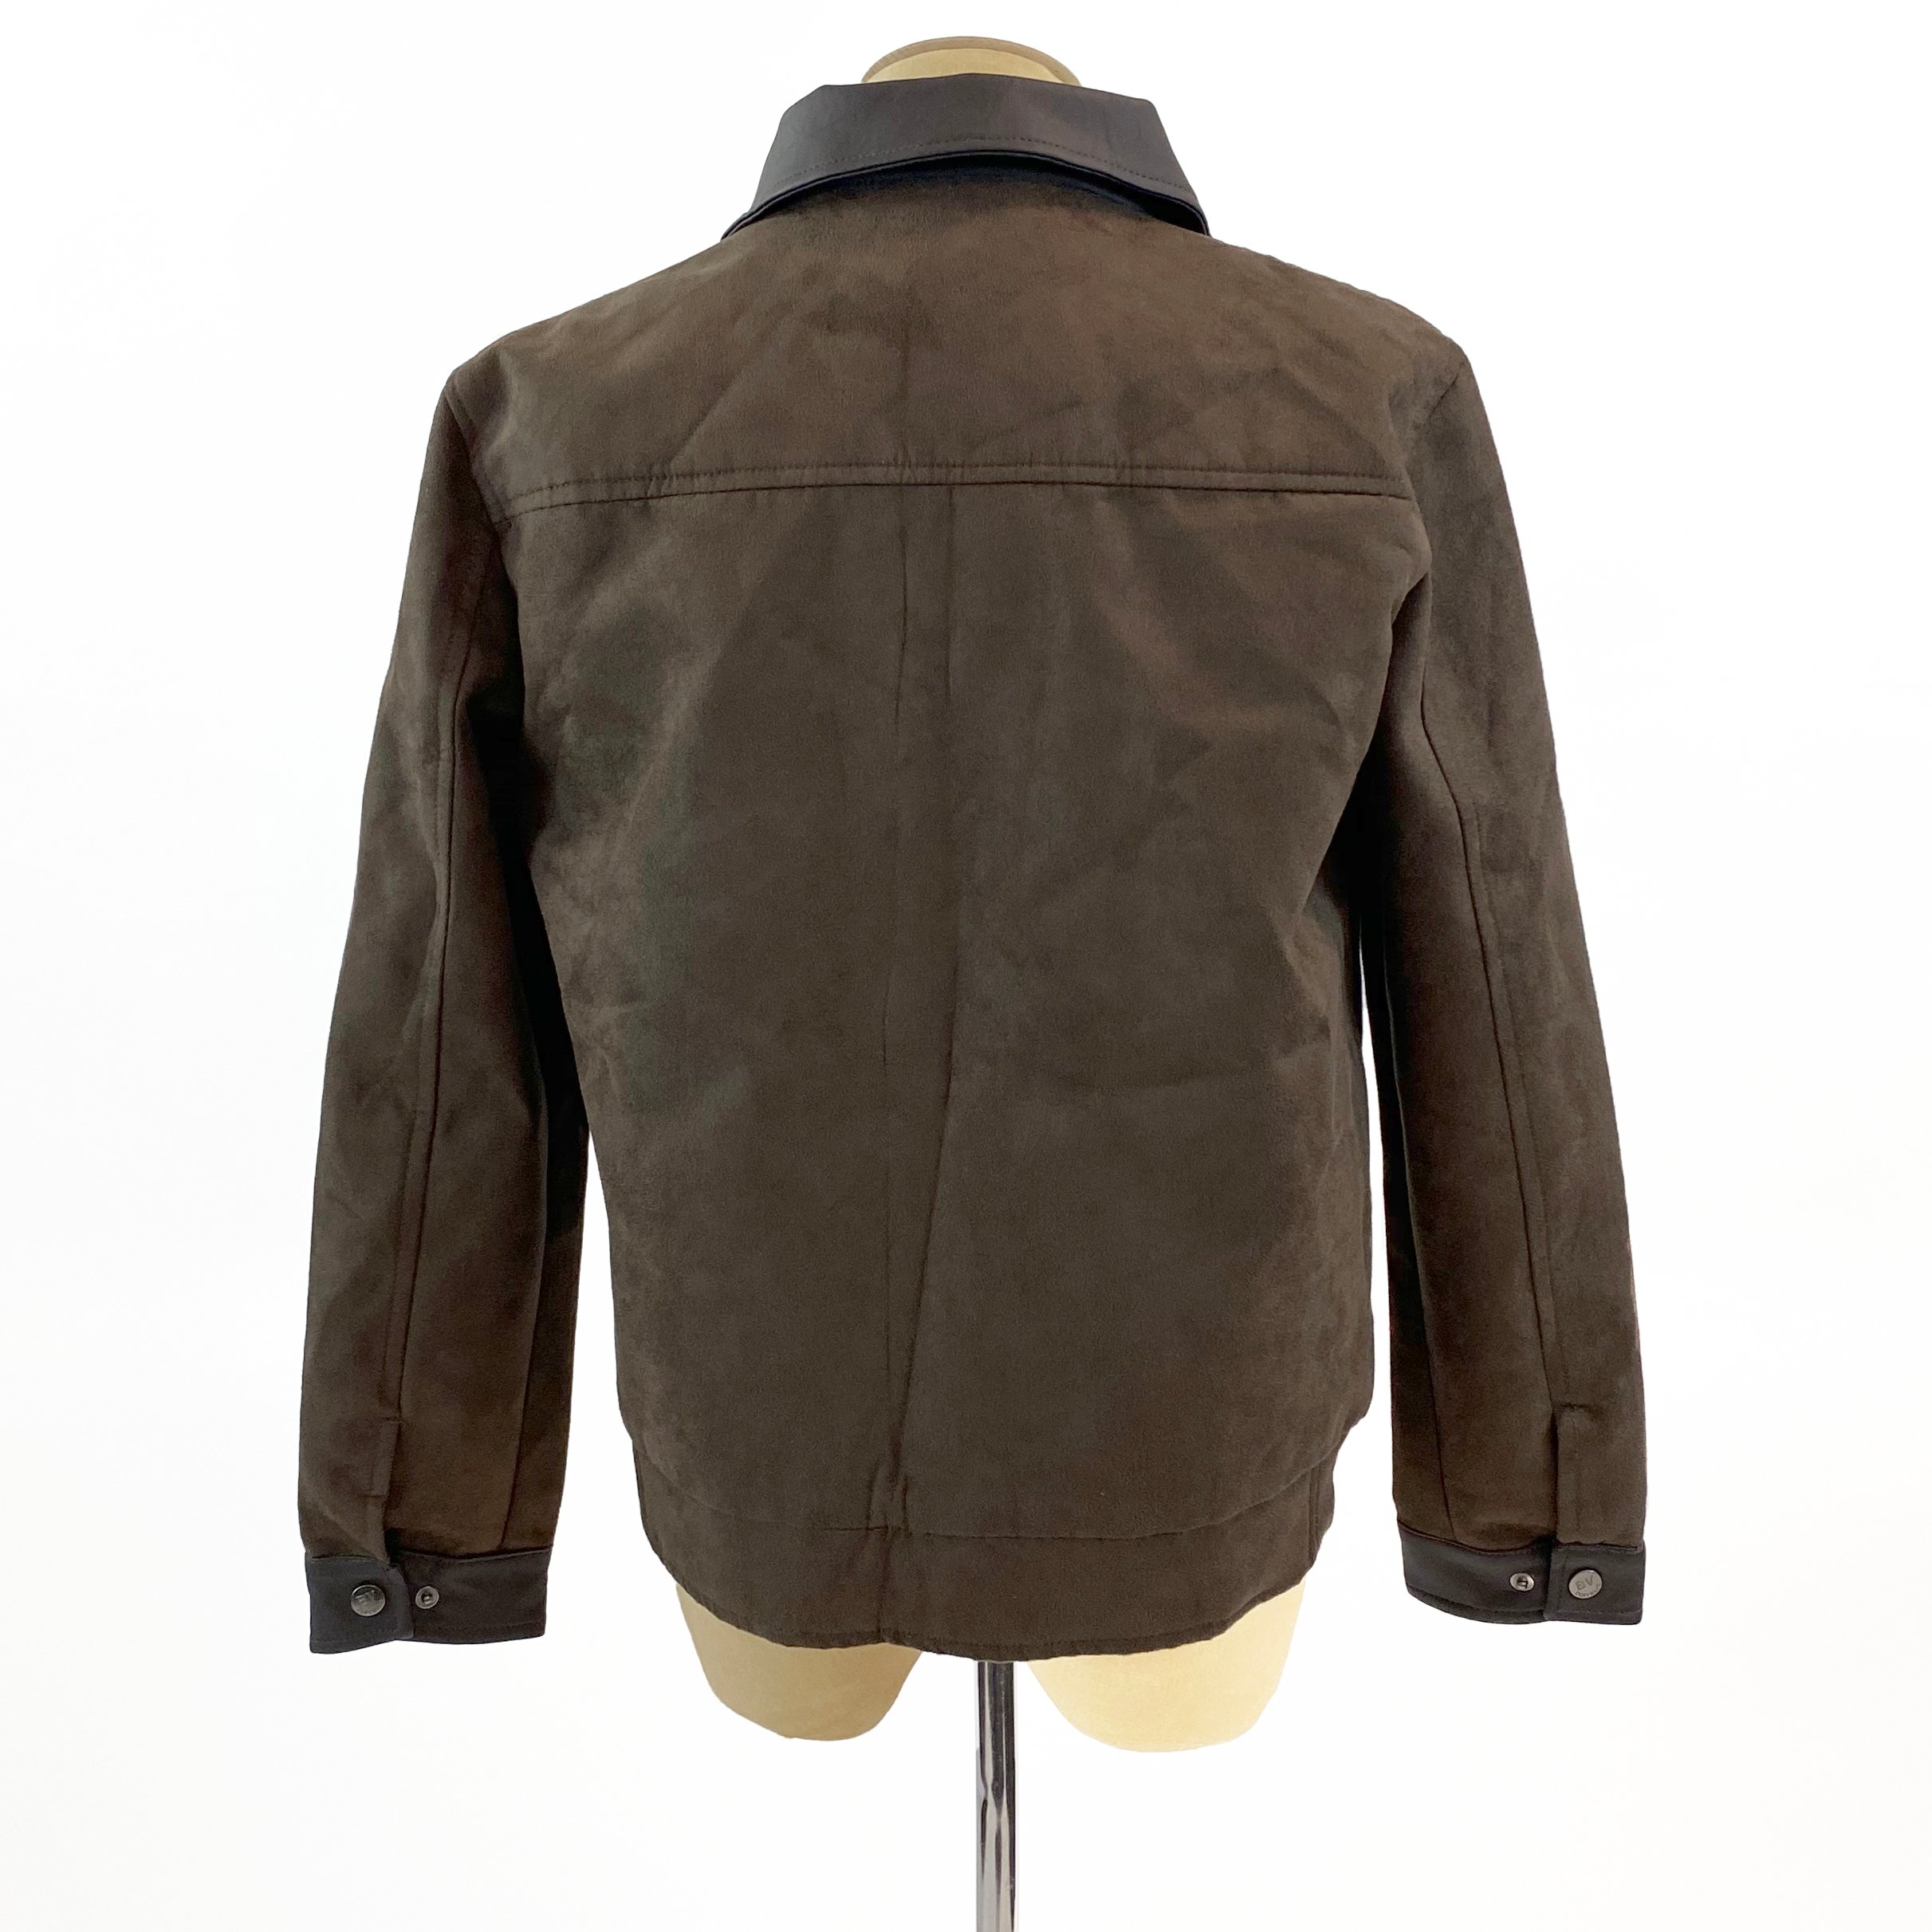 BV Chocolate Brown Suede/Leather Jacket Flat Collar